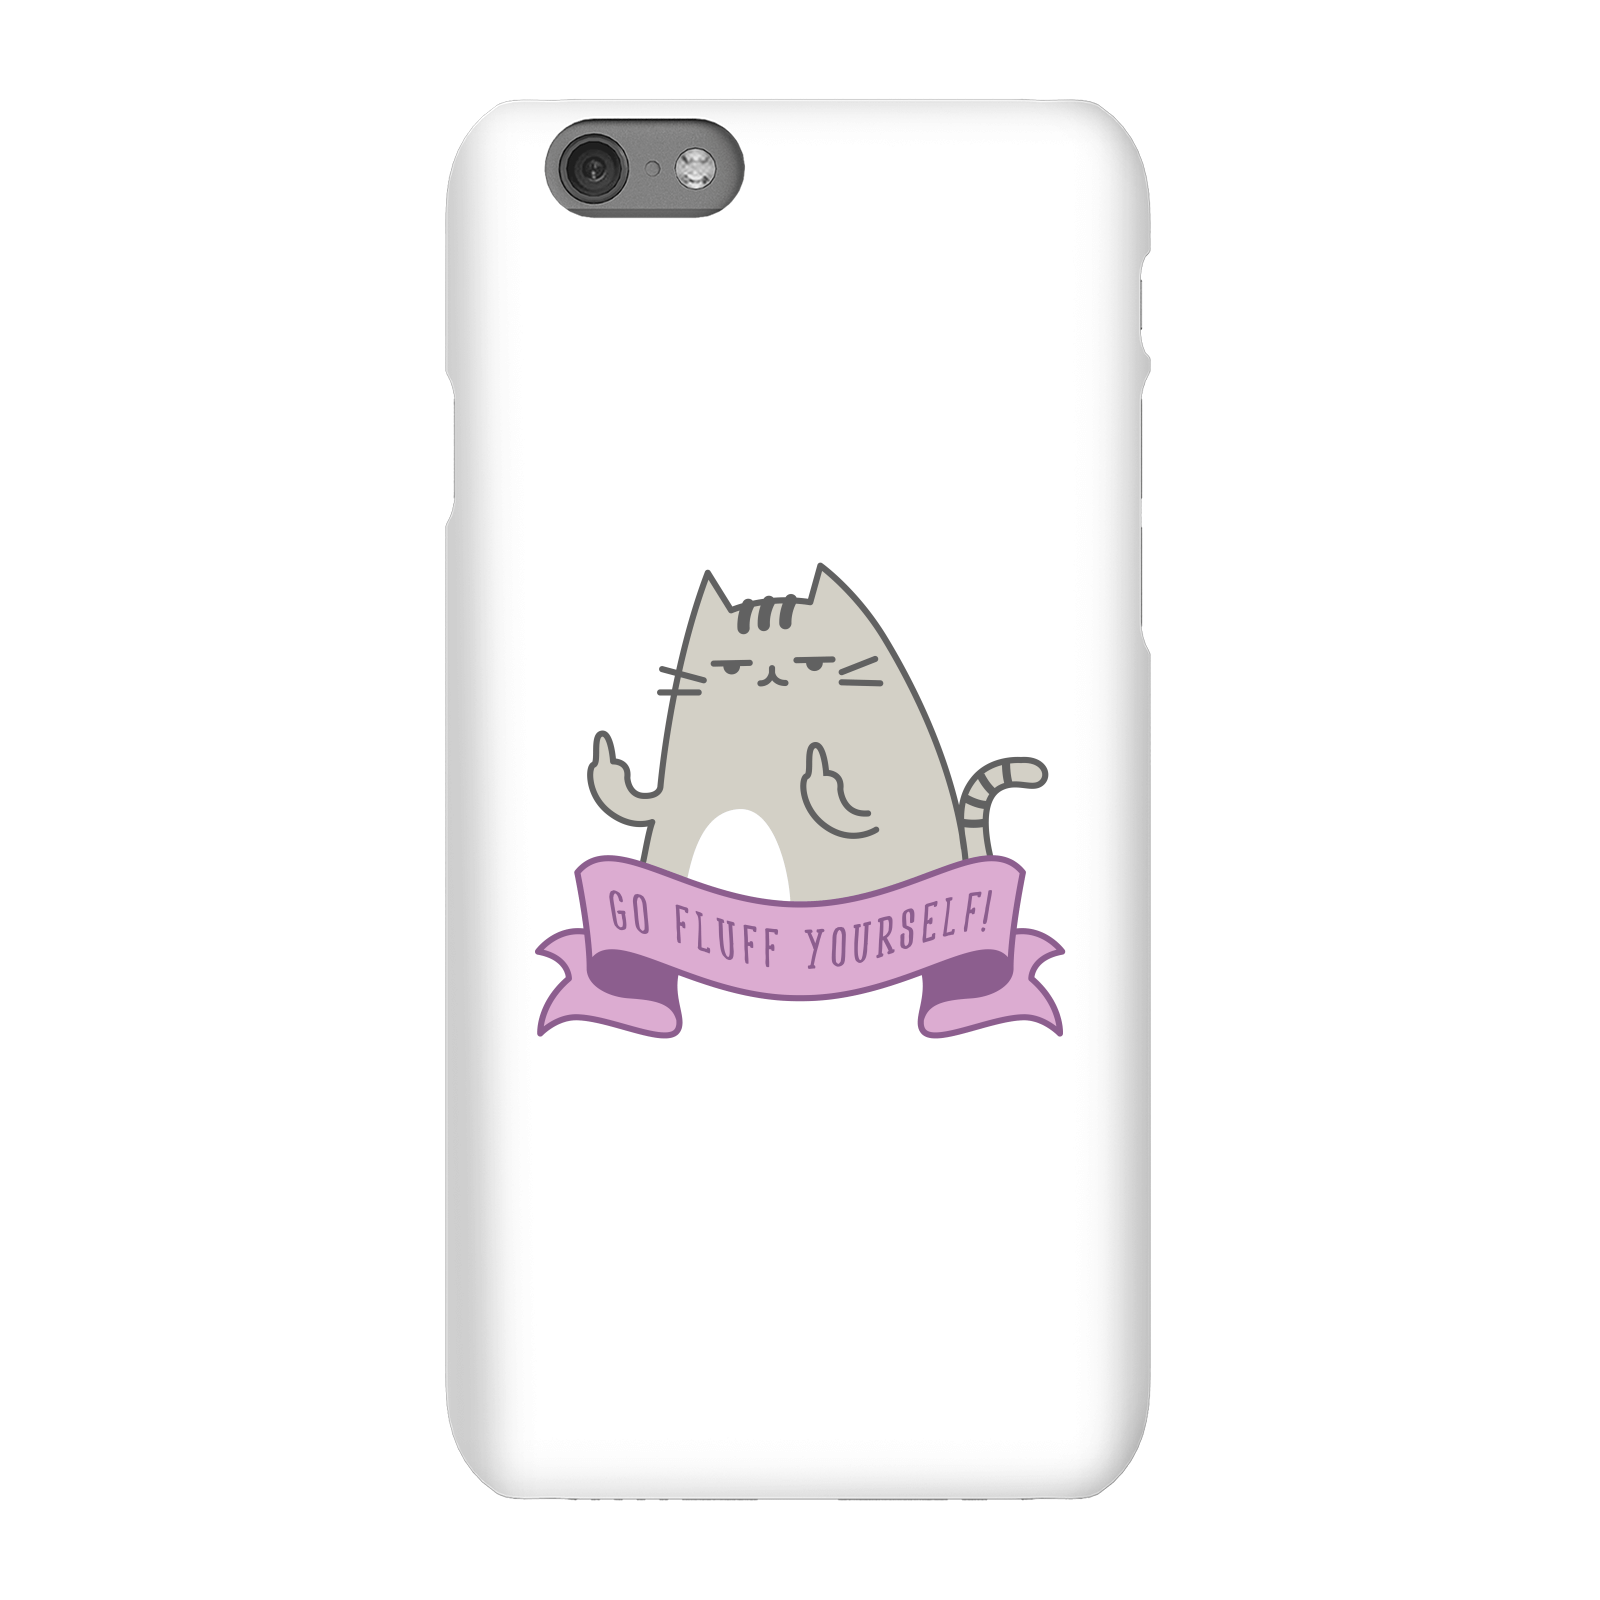 Go Fluff Yourself! Phone Case for iPhone and Android - iPhone 6S - Snap Case - Matte